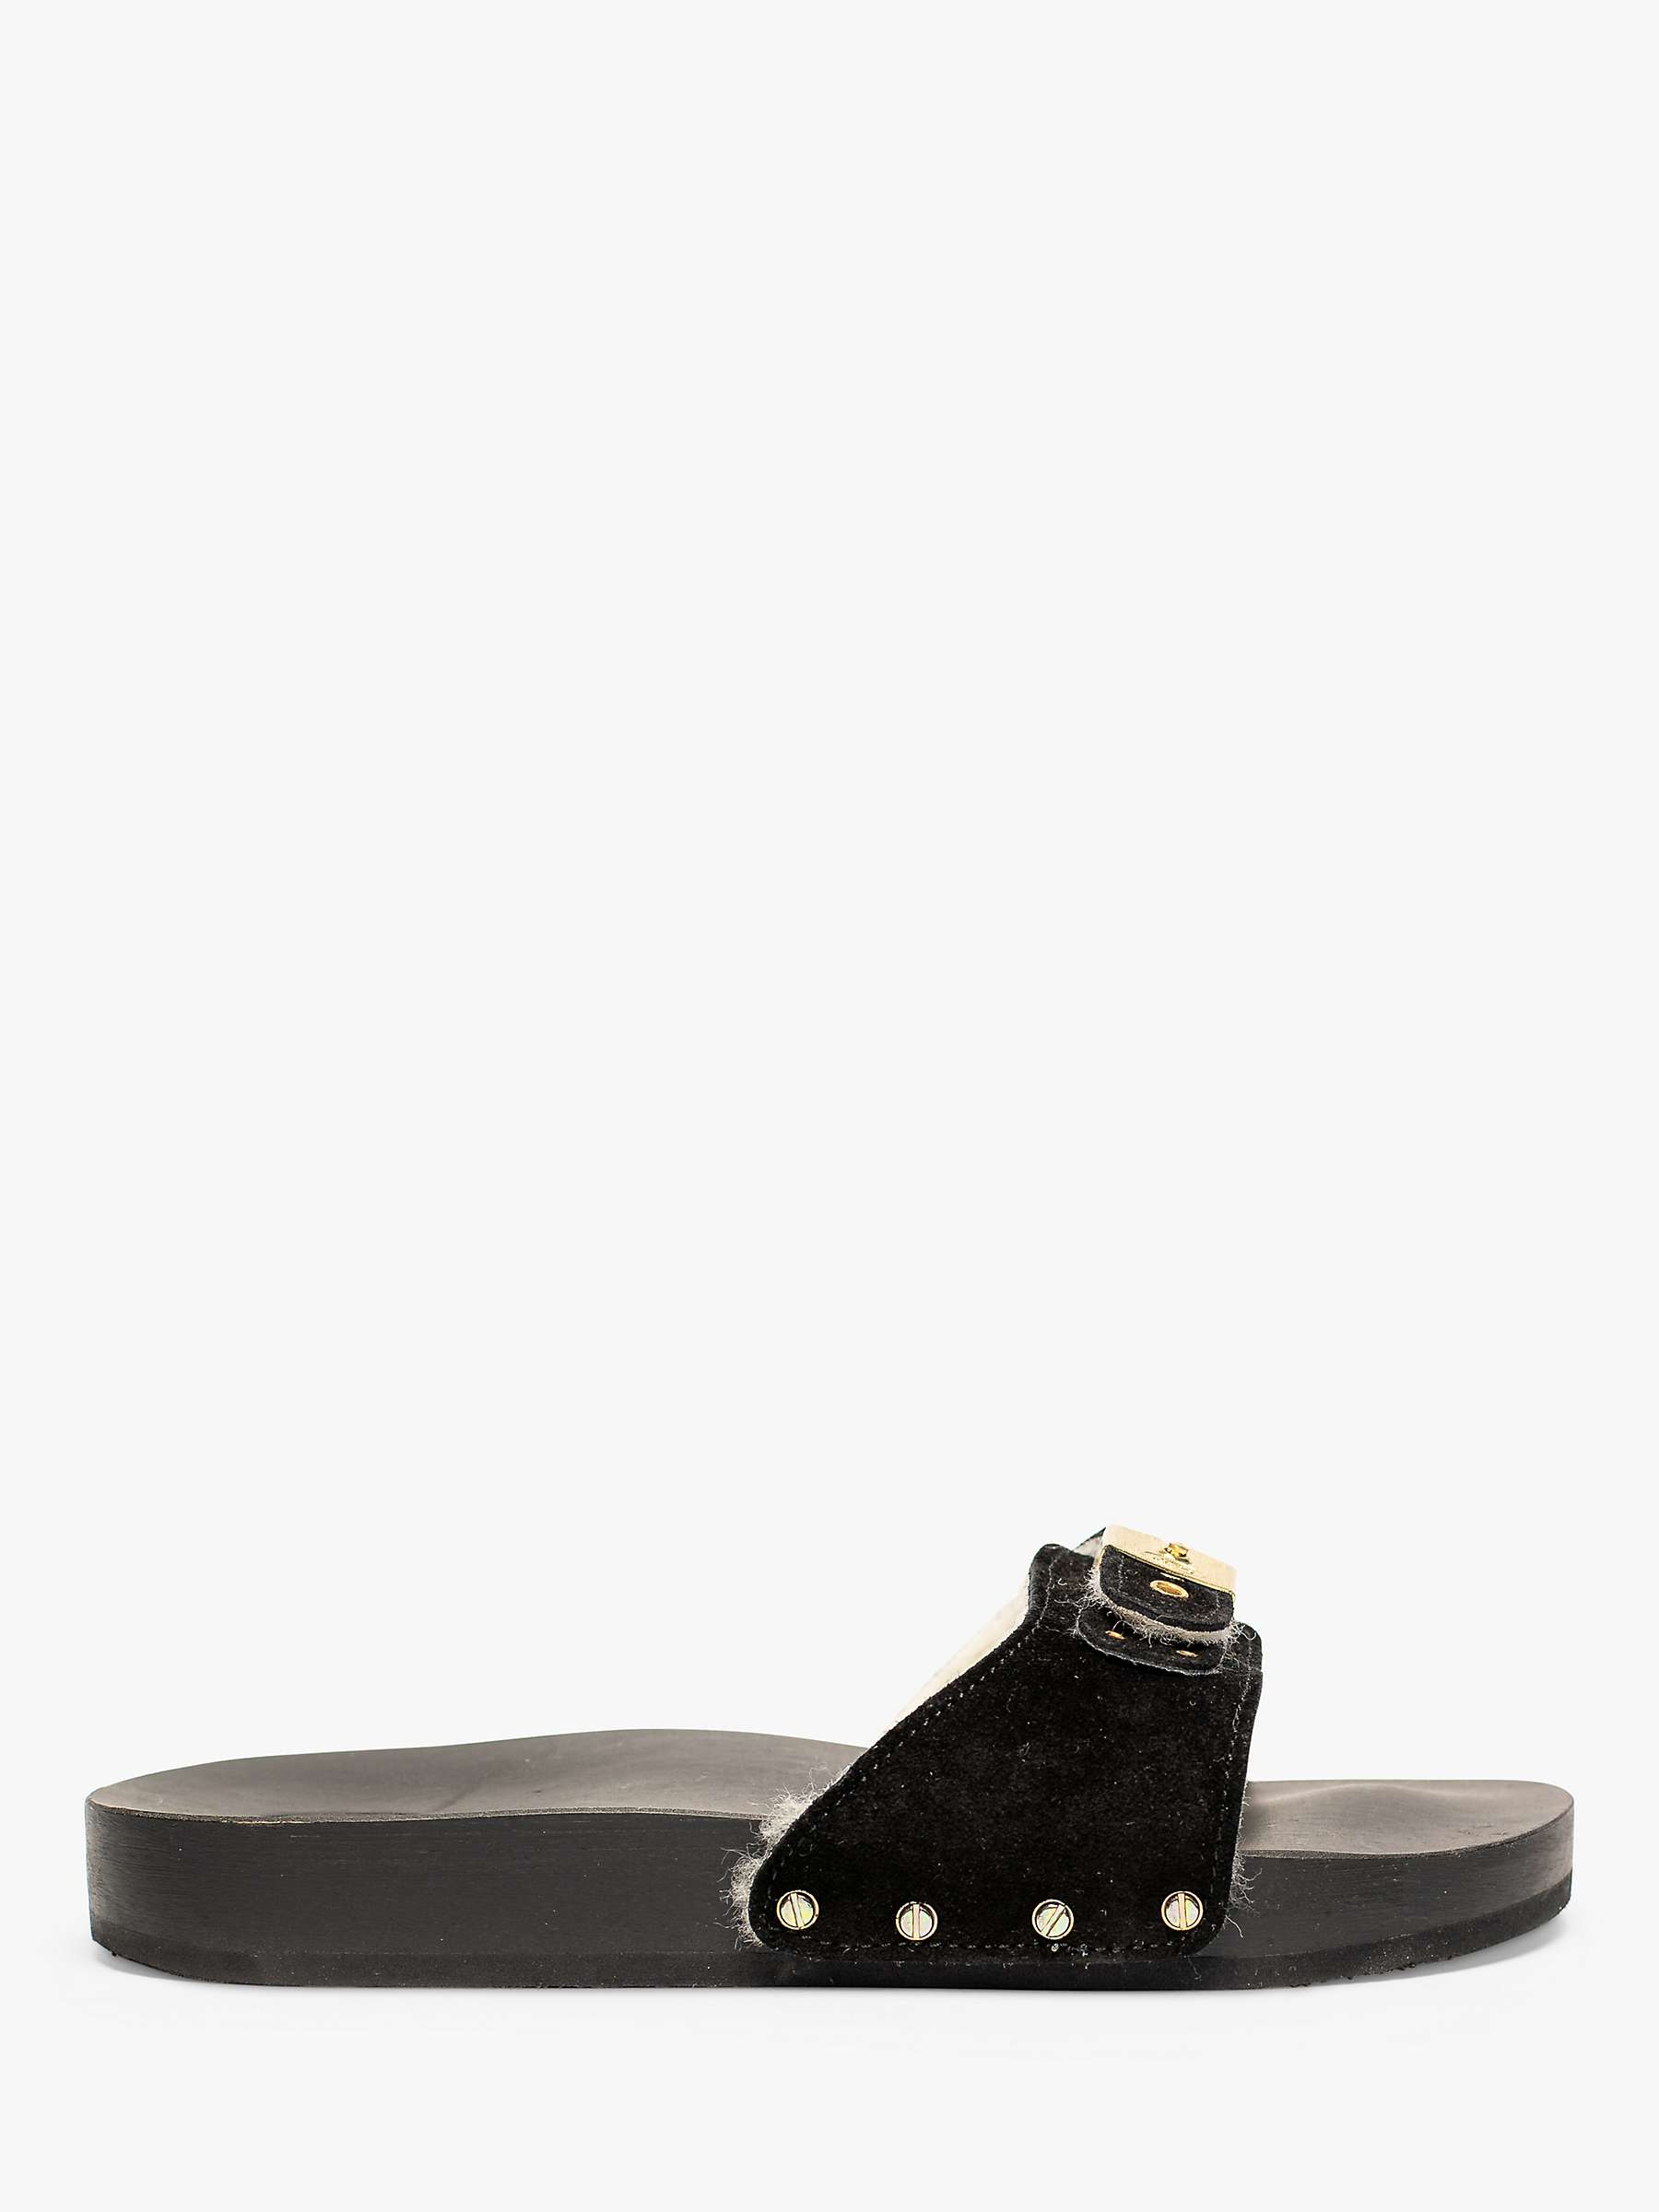 Buy Scholl Pescura Suede Wool-Lined Sandals, Black Online at johnlewis.com